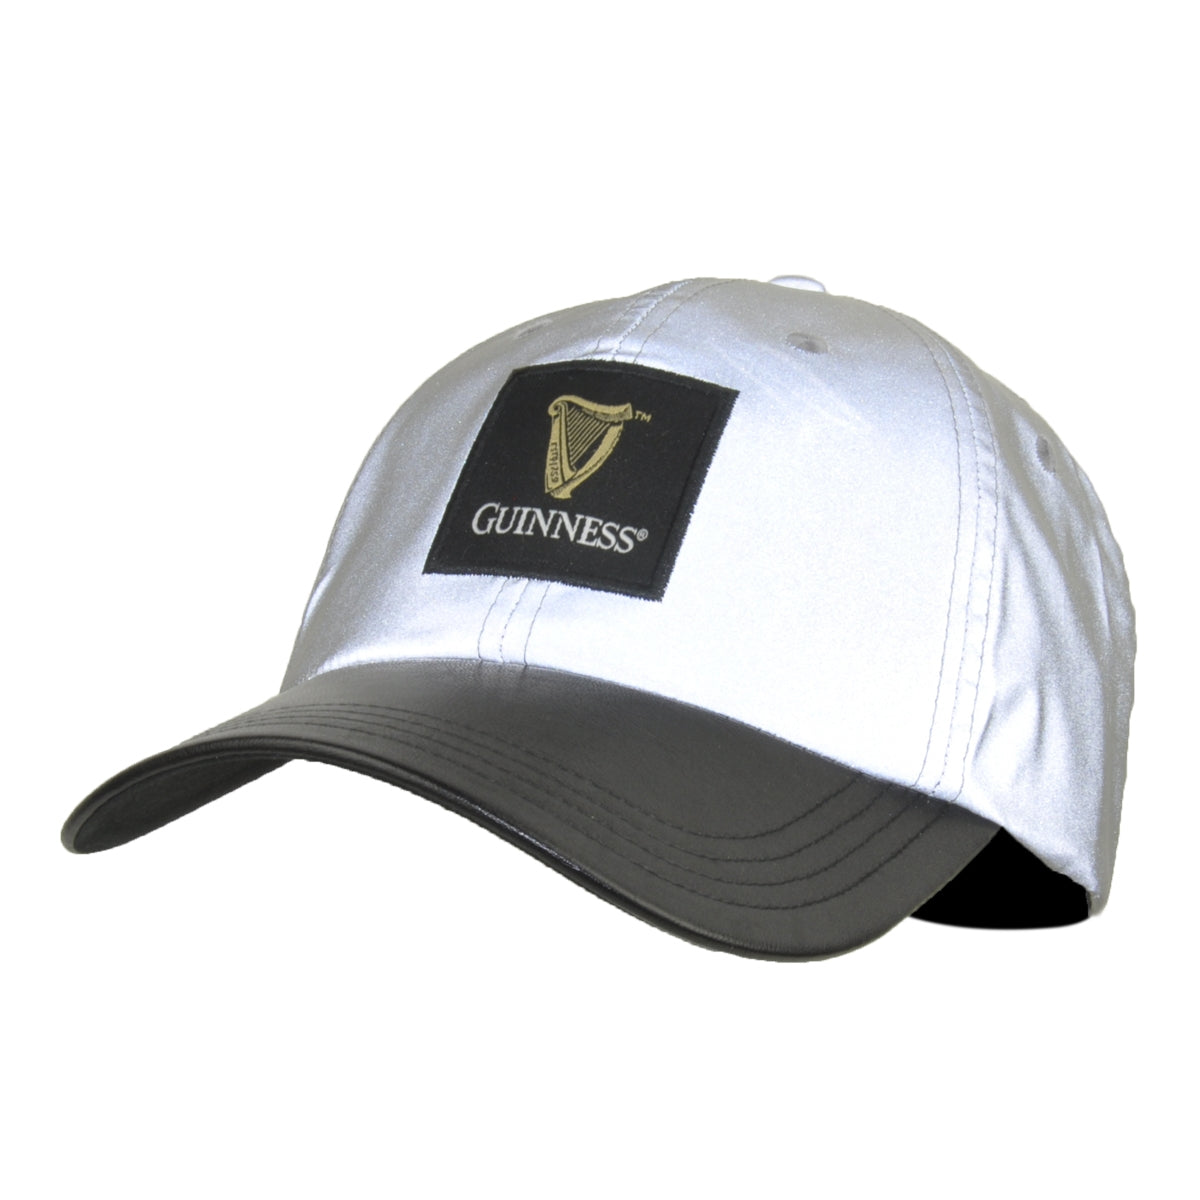 Silver baseball cap with a black brim featuring a reflective Guinness UK logo patch on the front.